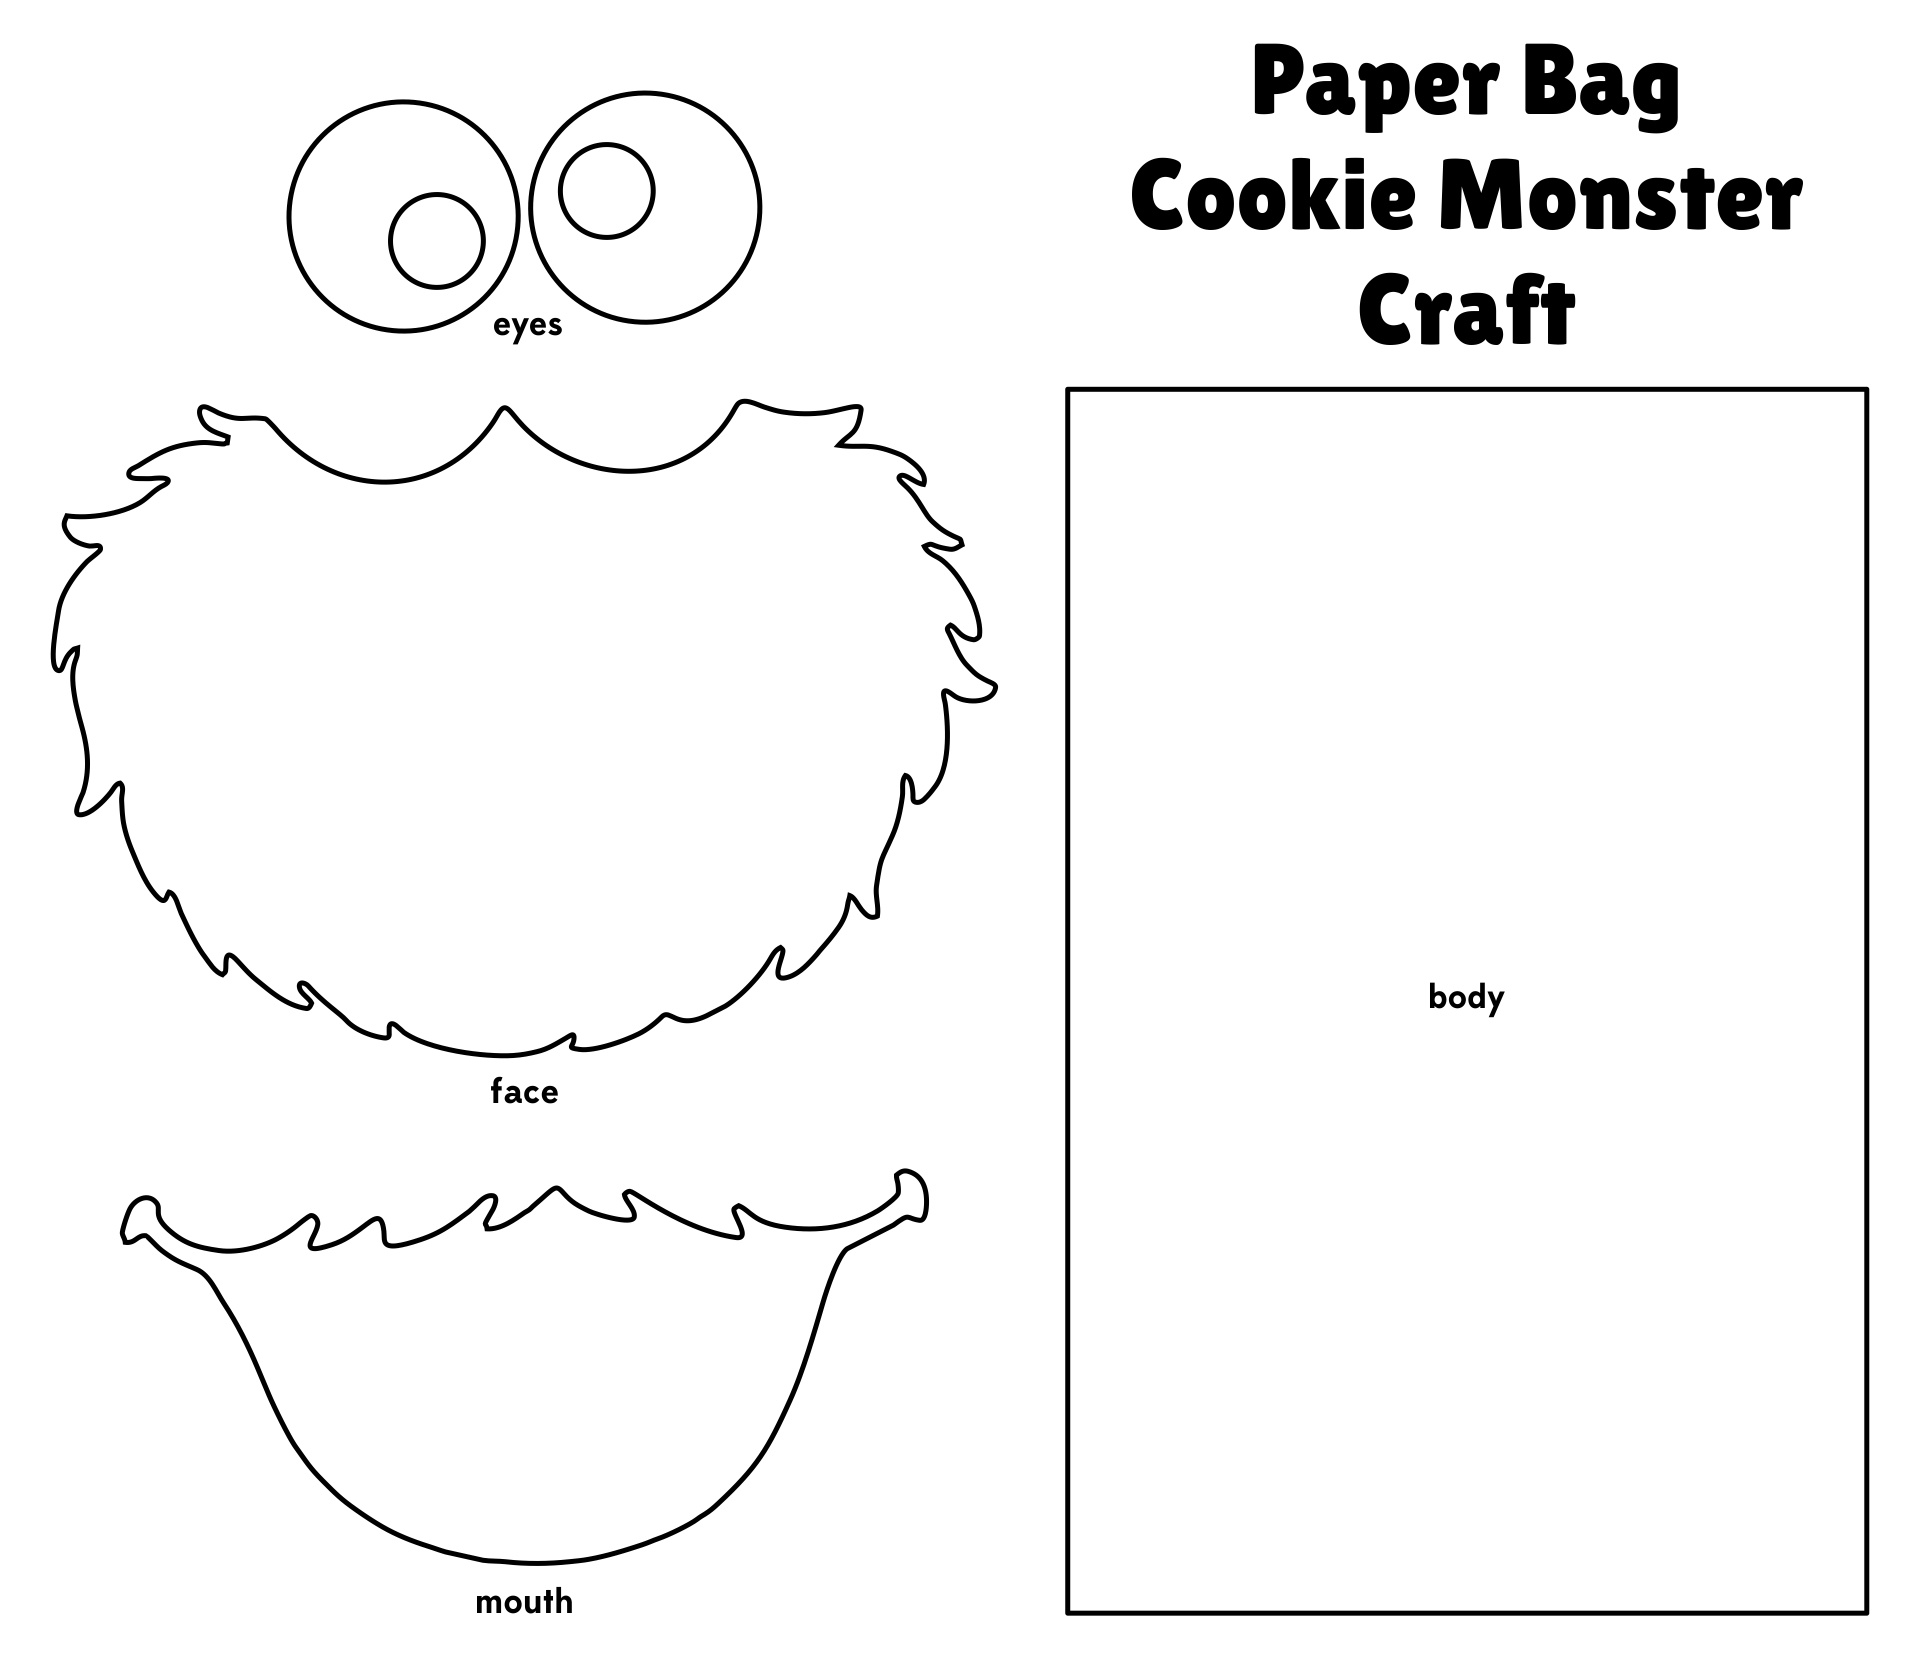 Paper Bag Cookie Monster Craft Template